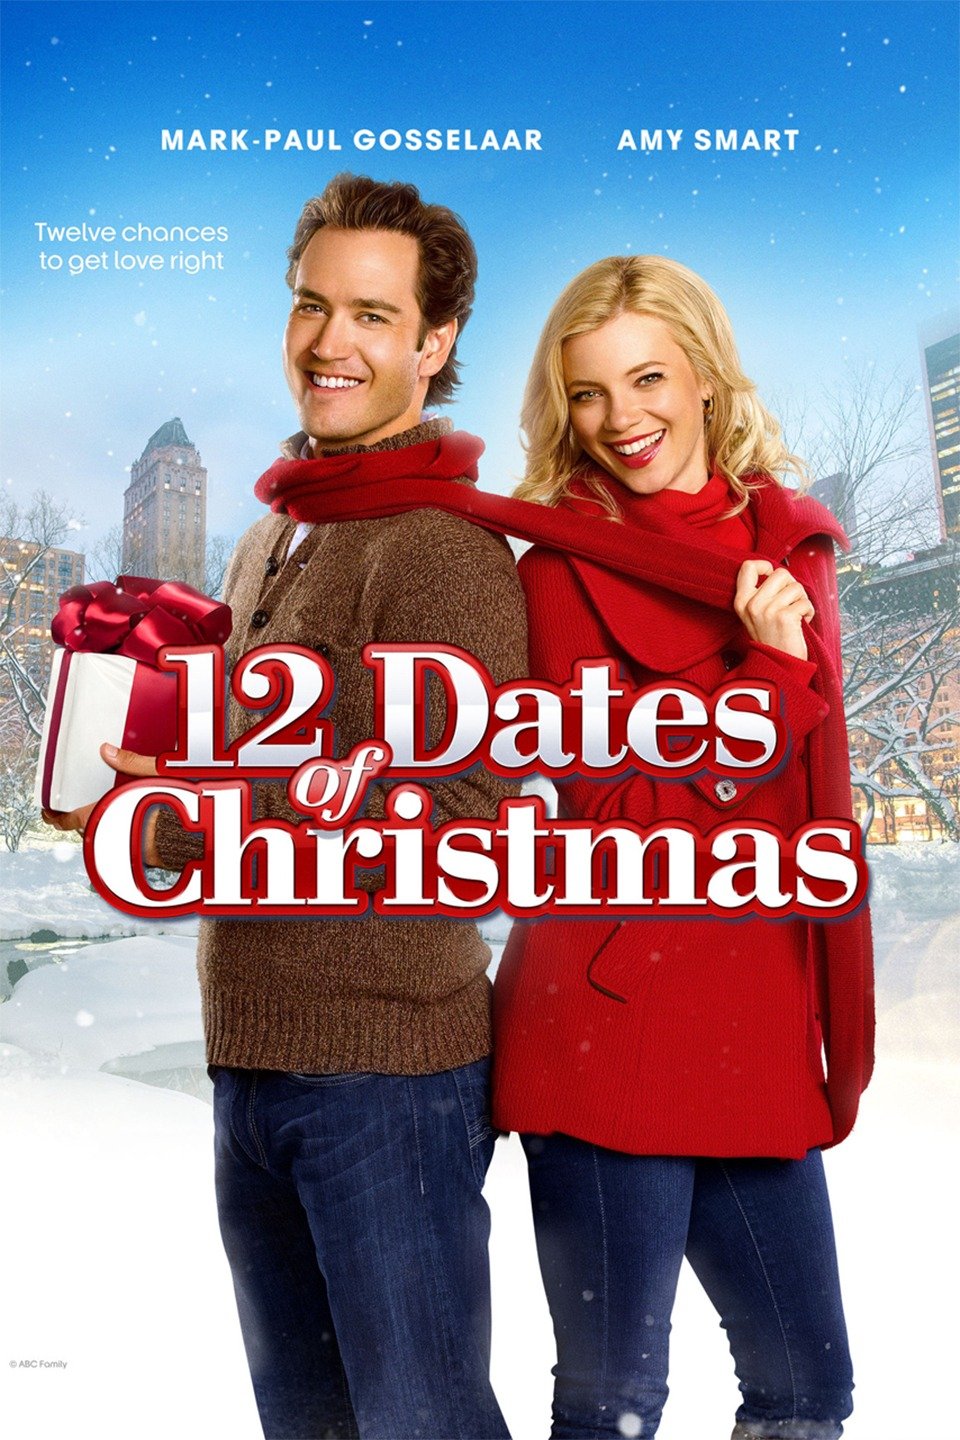 12 Dates of Christmas - Rotten Tomatoes